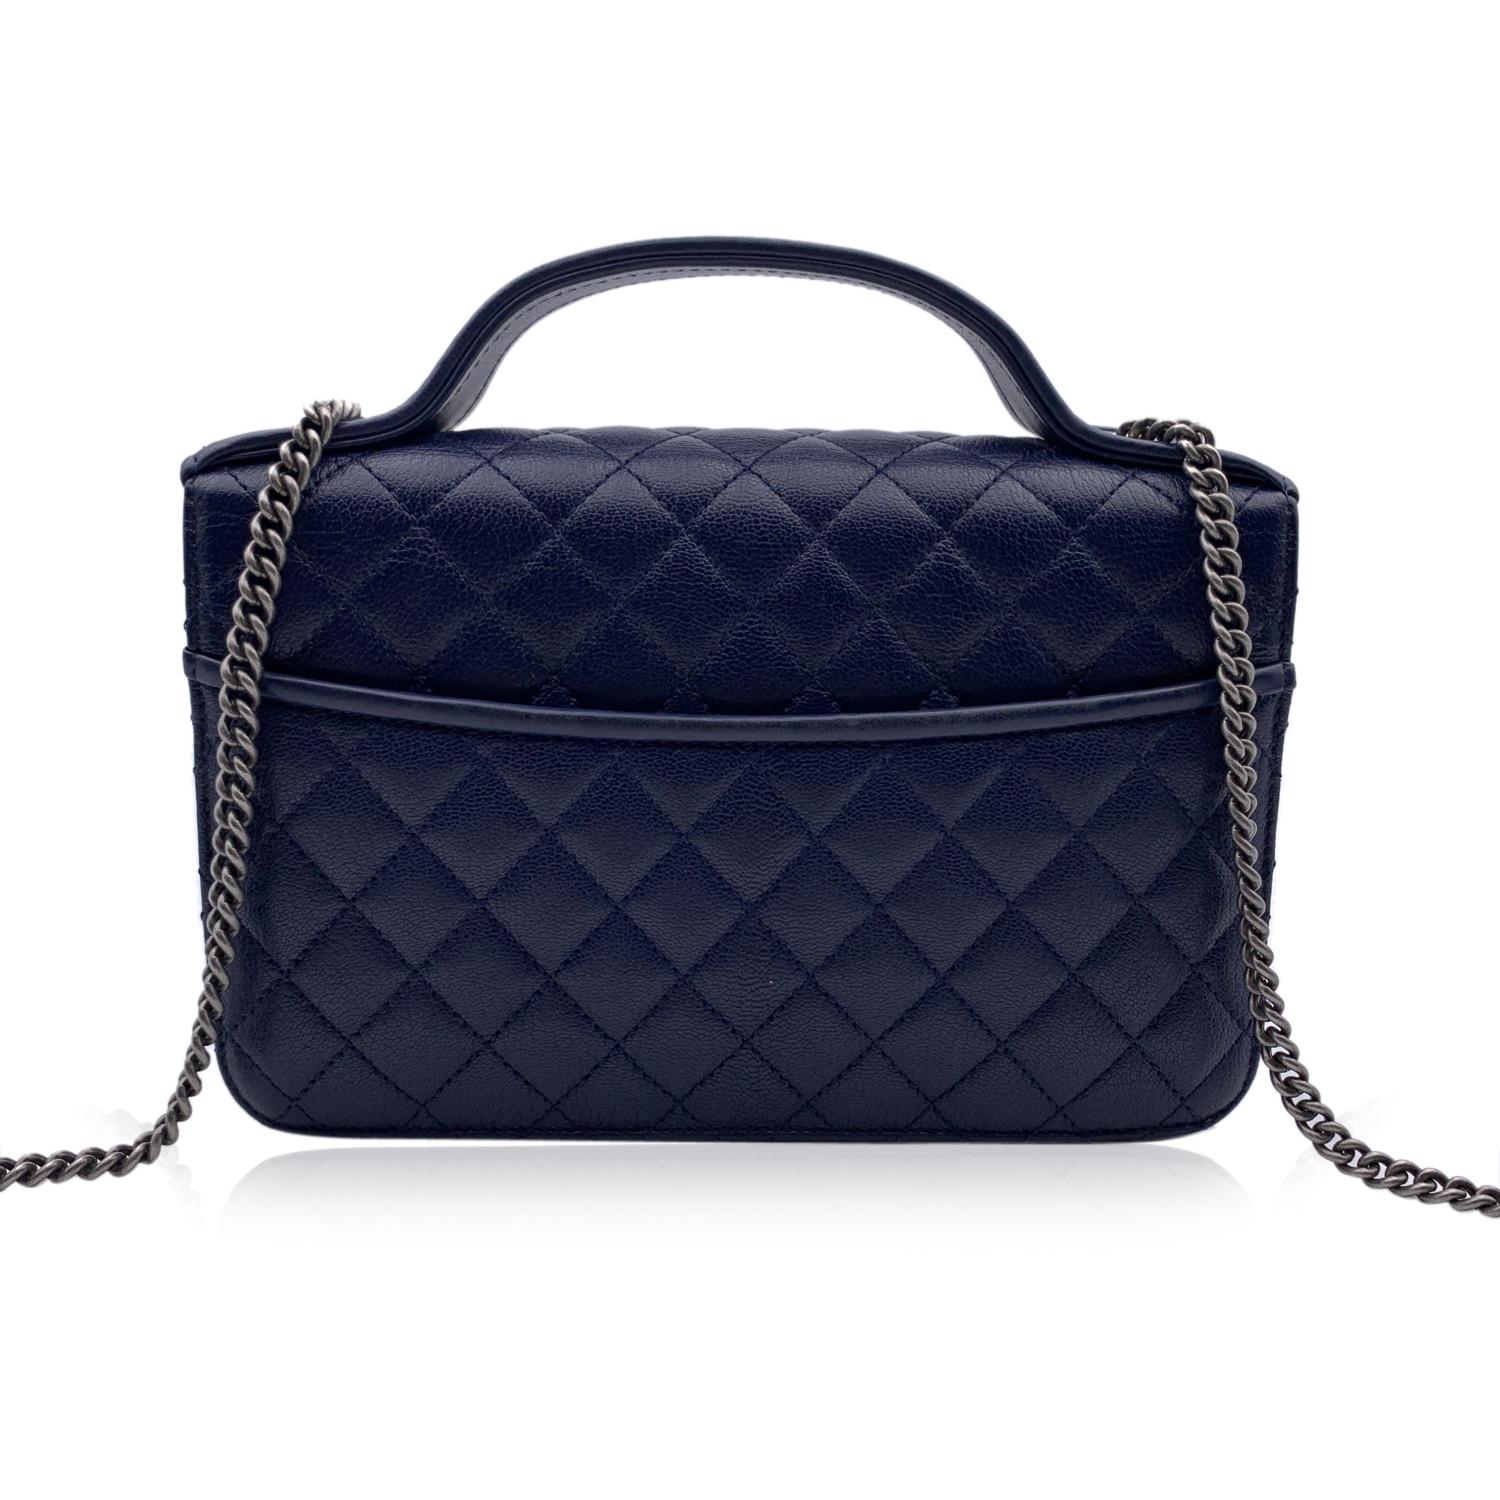 Black Chanel Blue Quilted Leather Small University Crossbody Bag